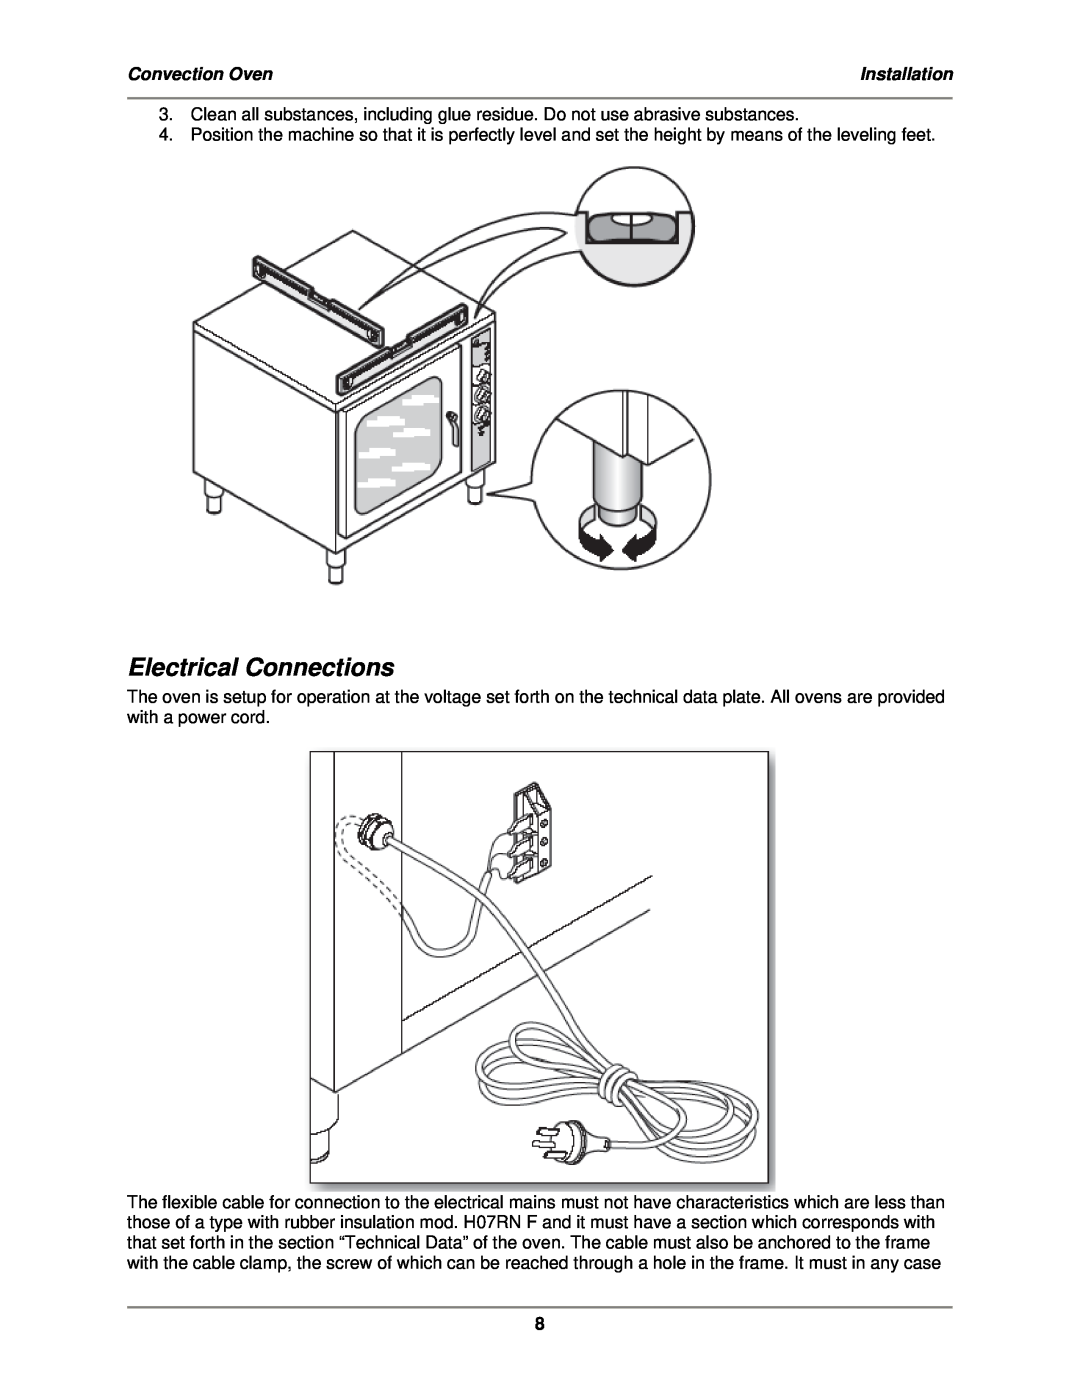 Bakers Pride Oven MT-200 service manual Electrical Connections, Convection Oven, Installation 